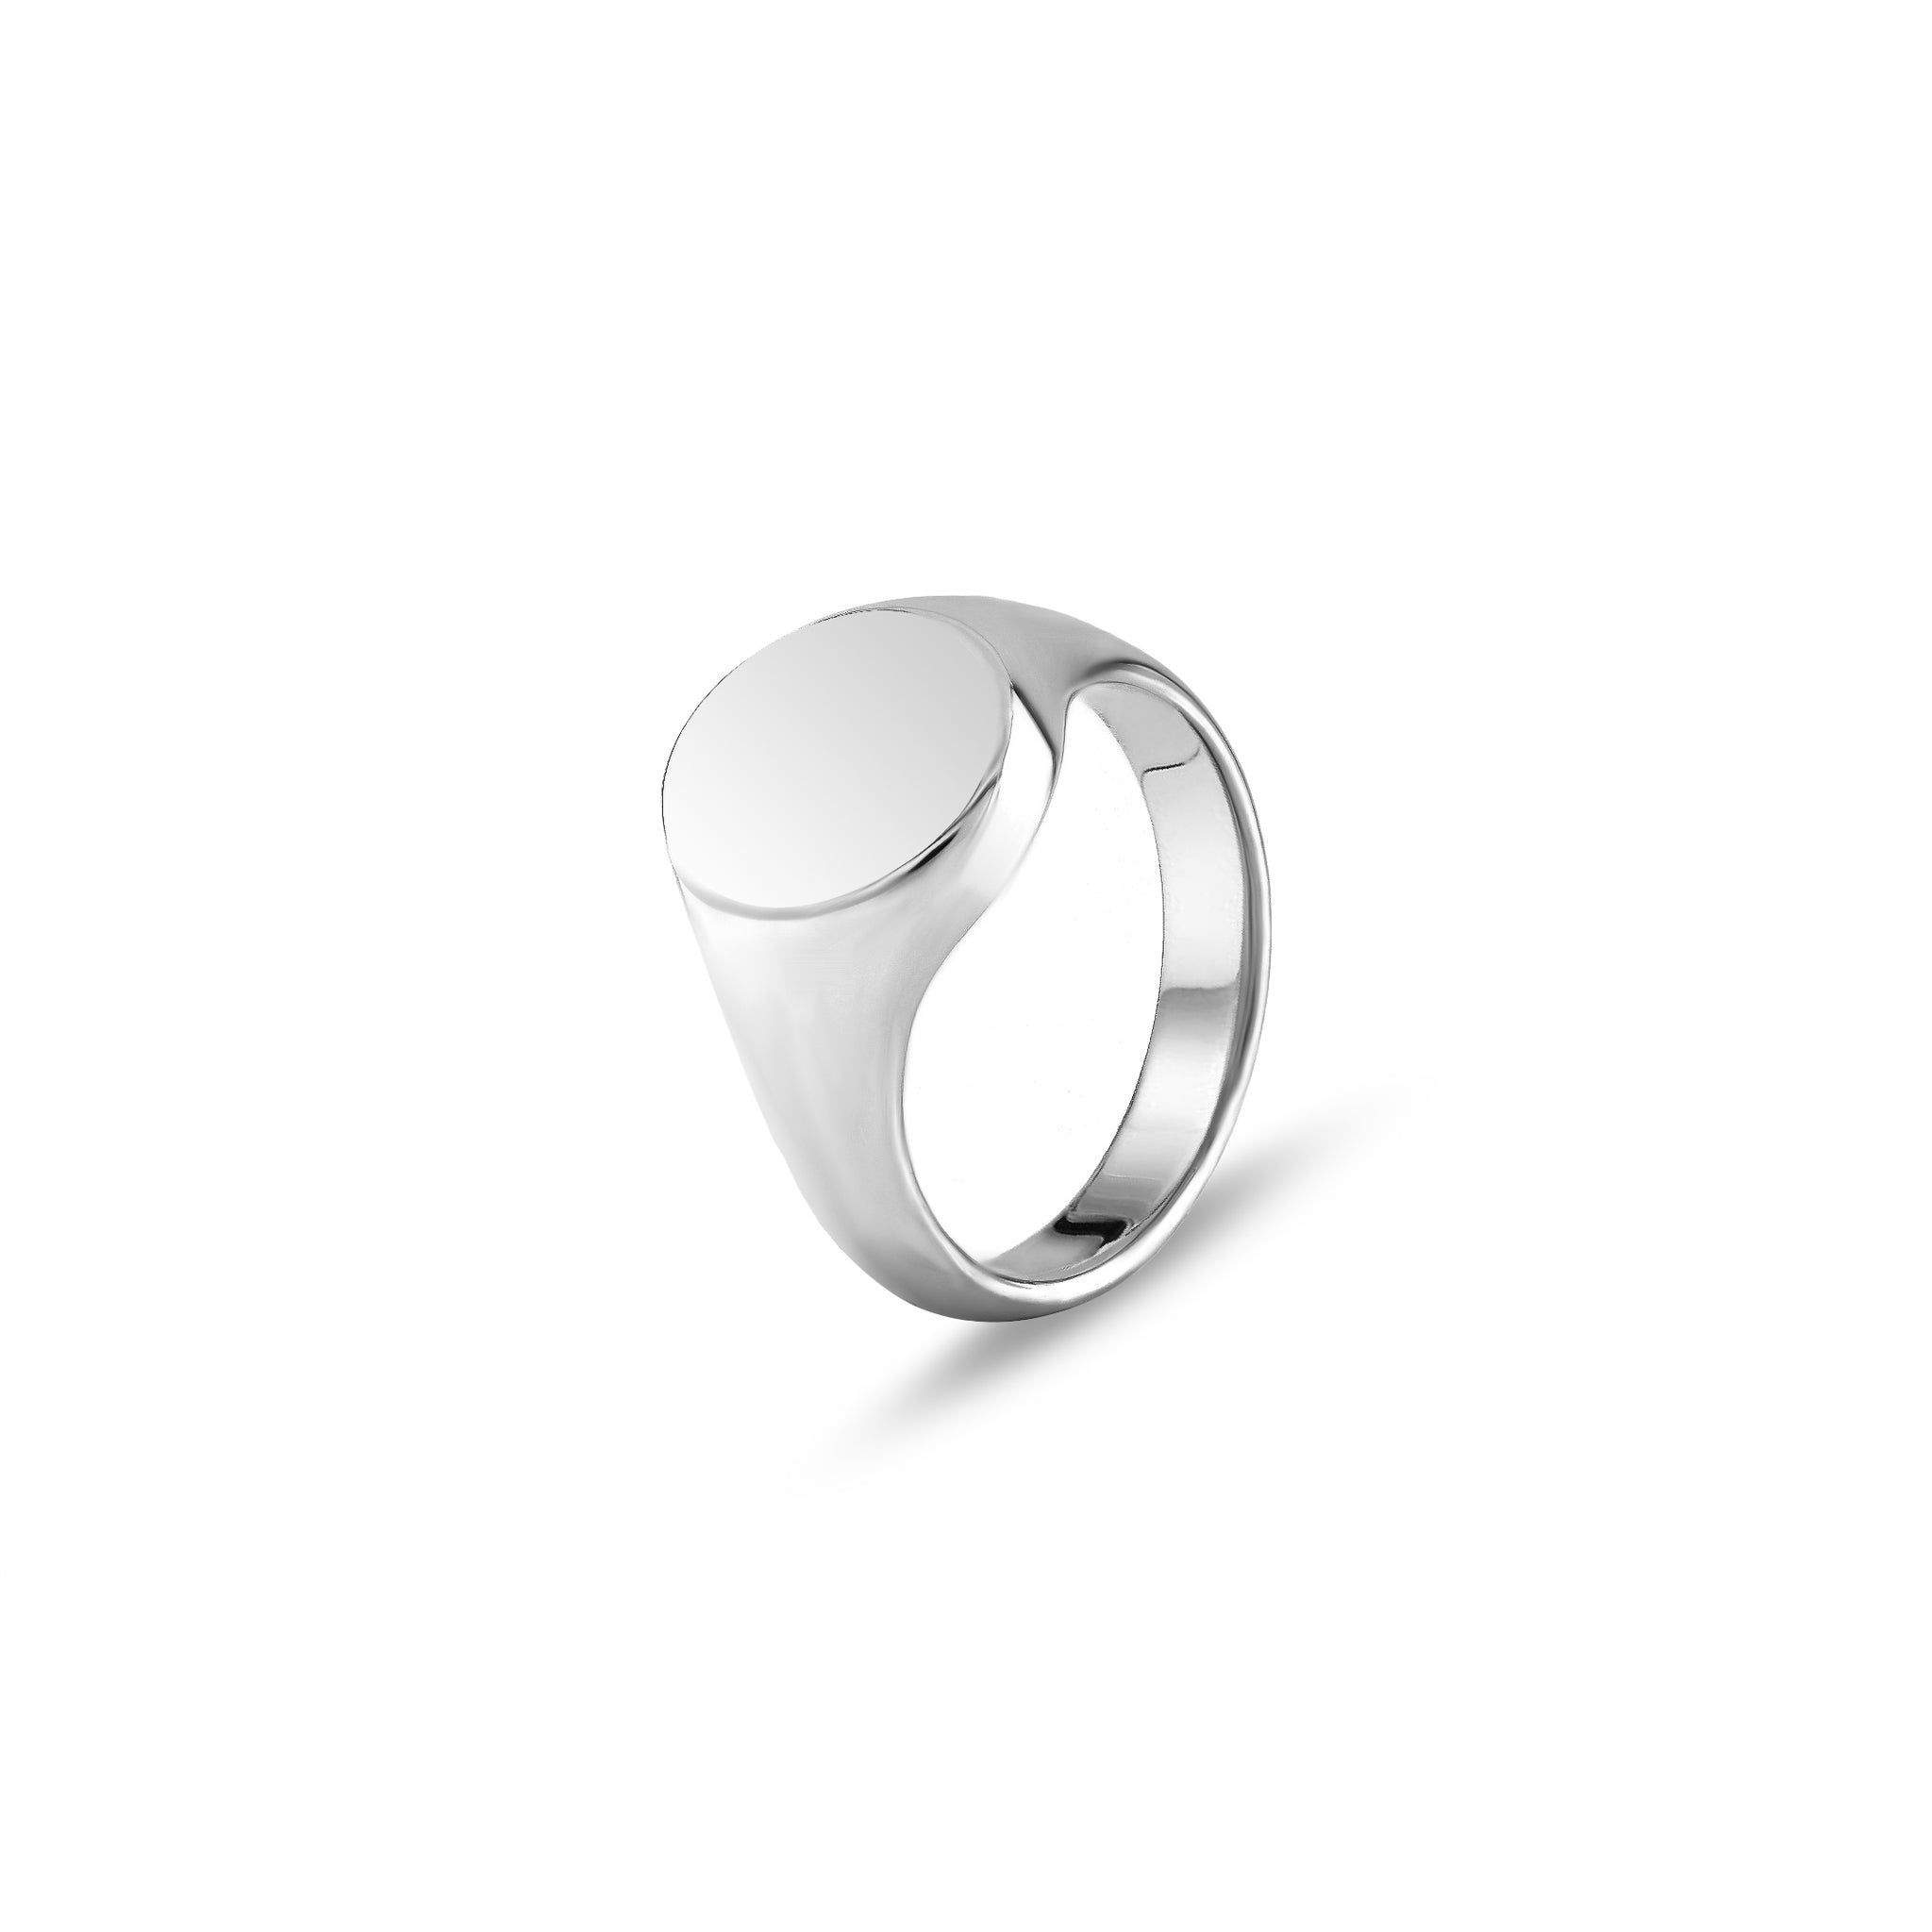 18ct White Gold 13 x 11mm Oval Signet Ring